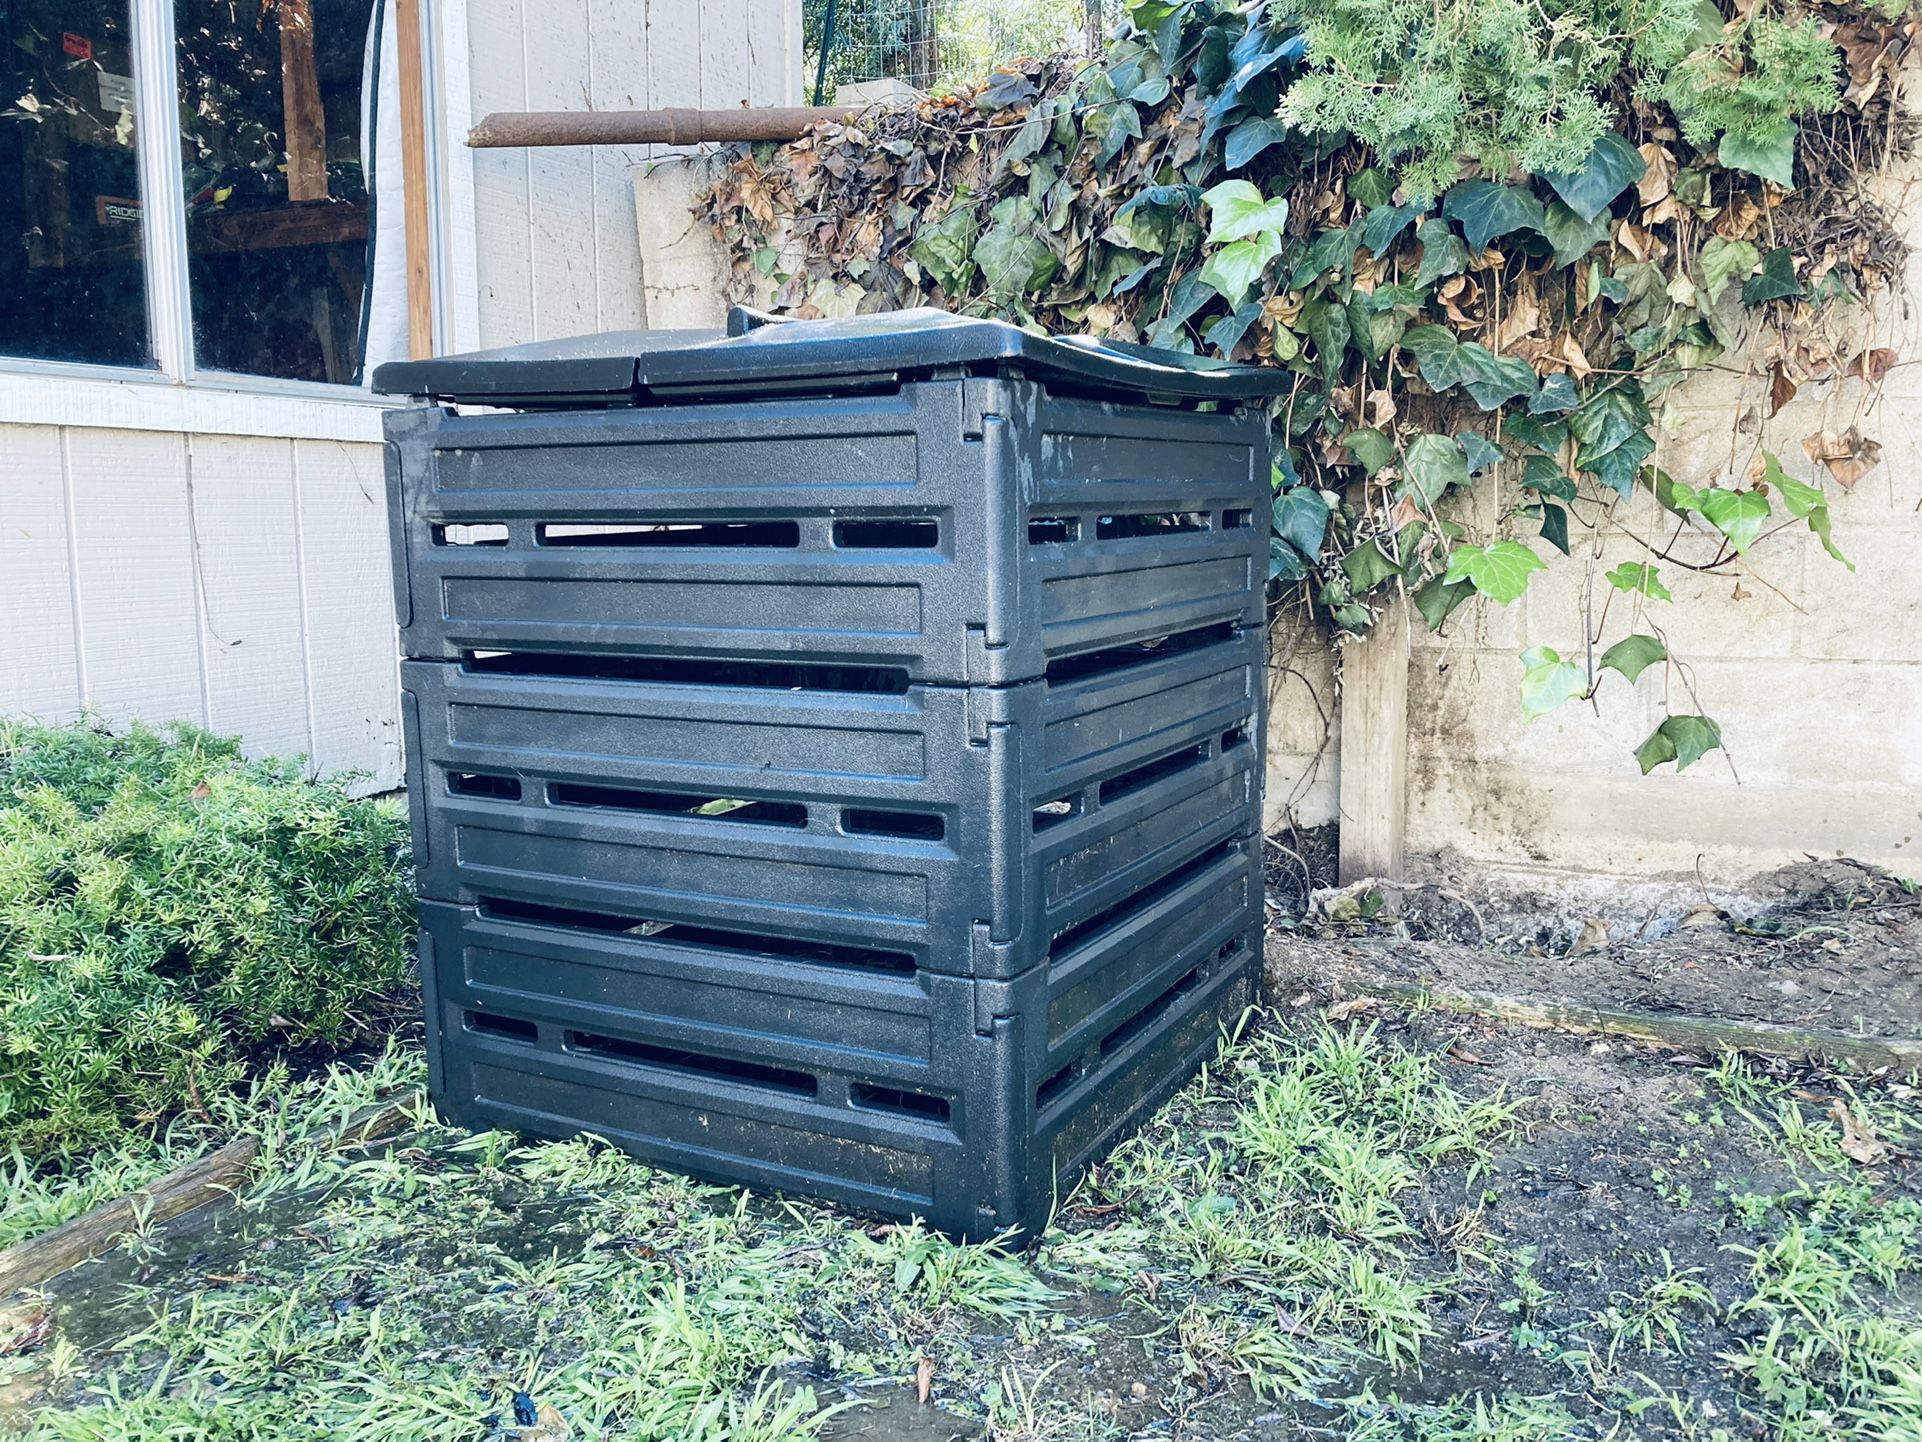 Biostack Composter From Smith & Hawken